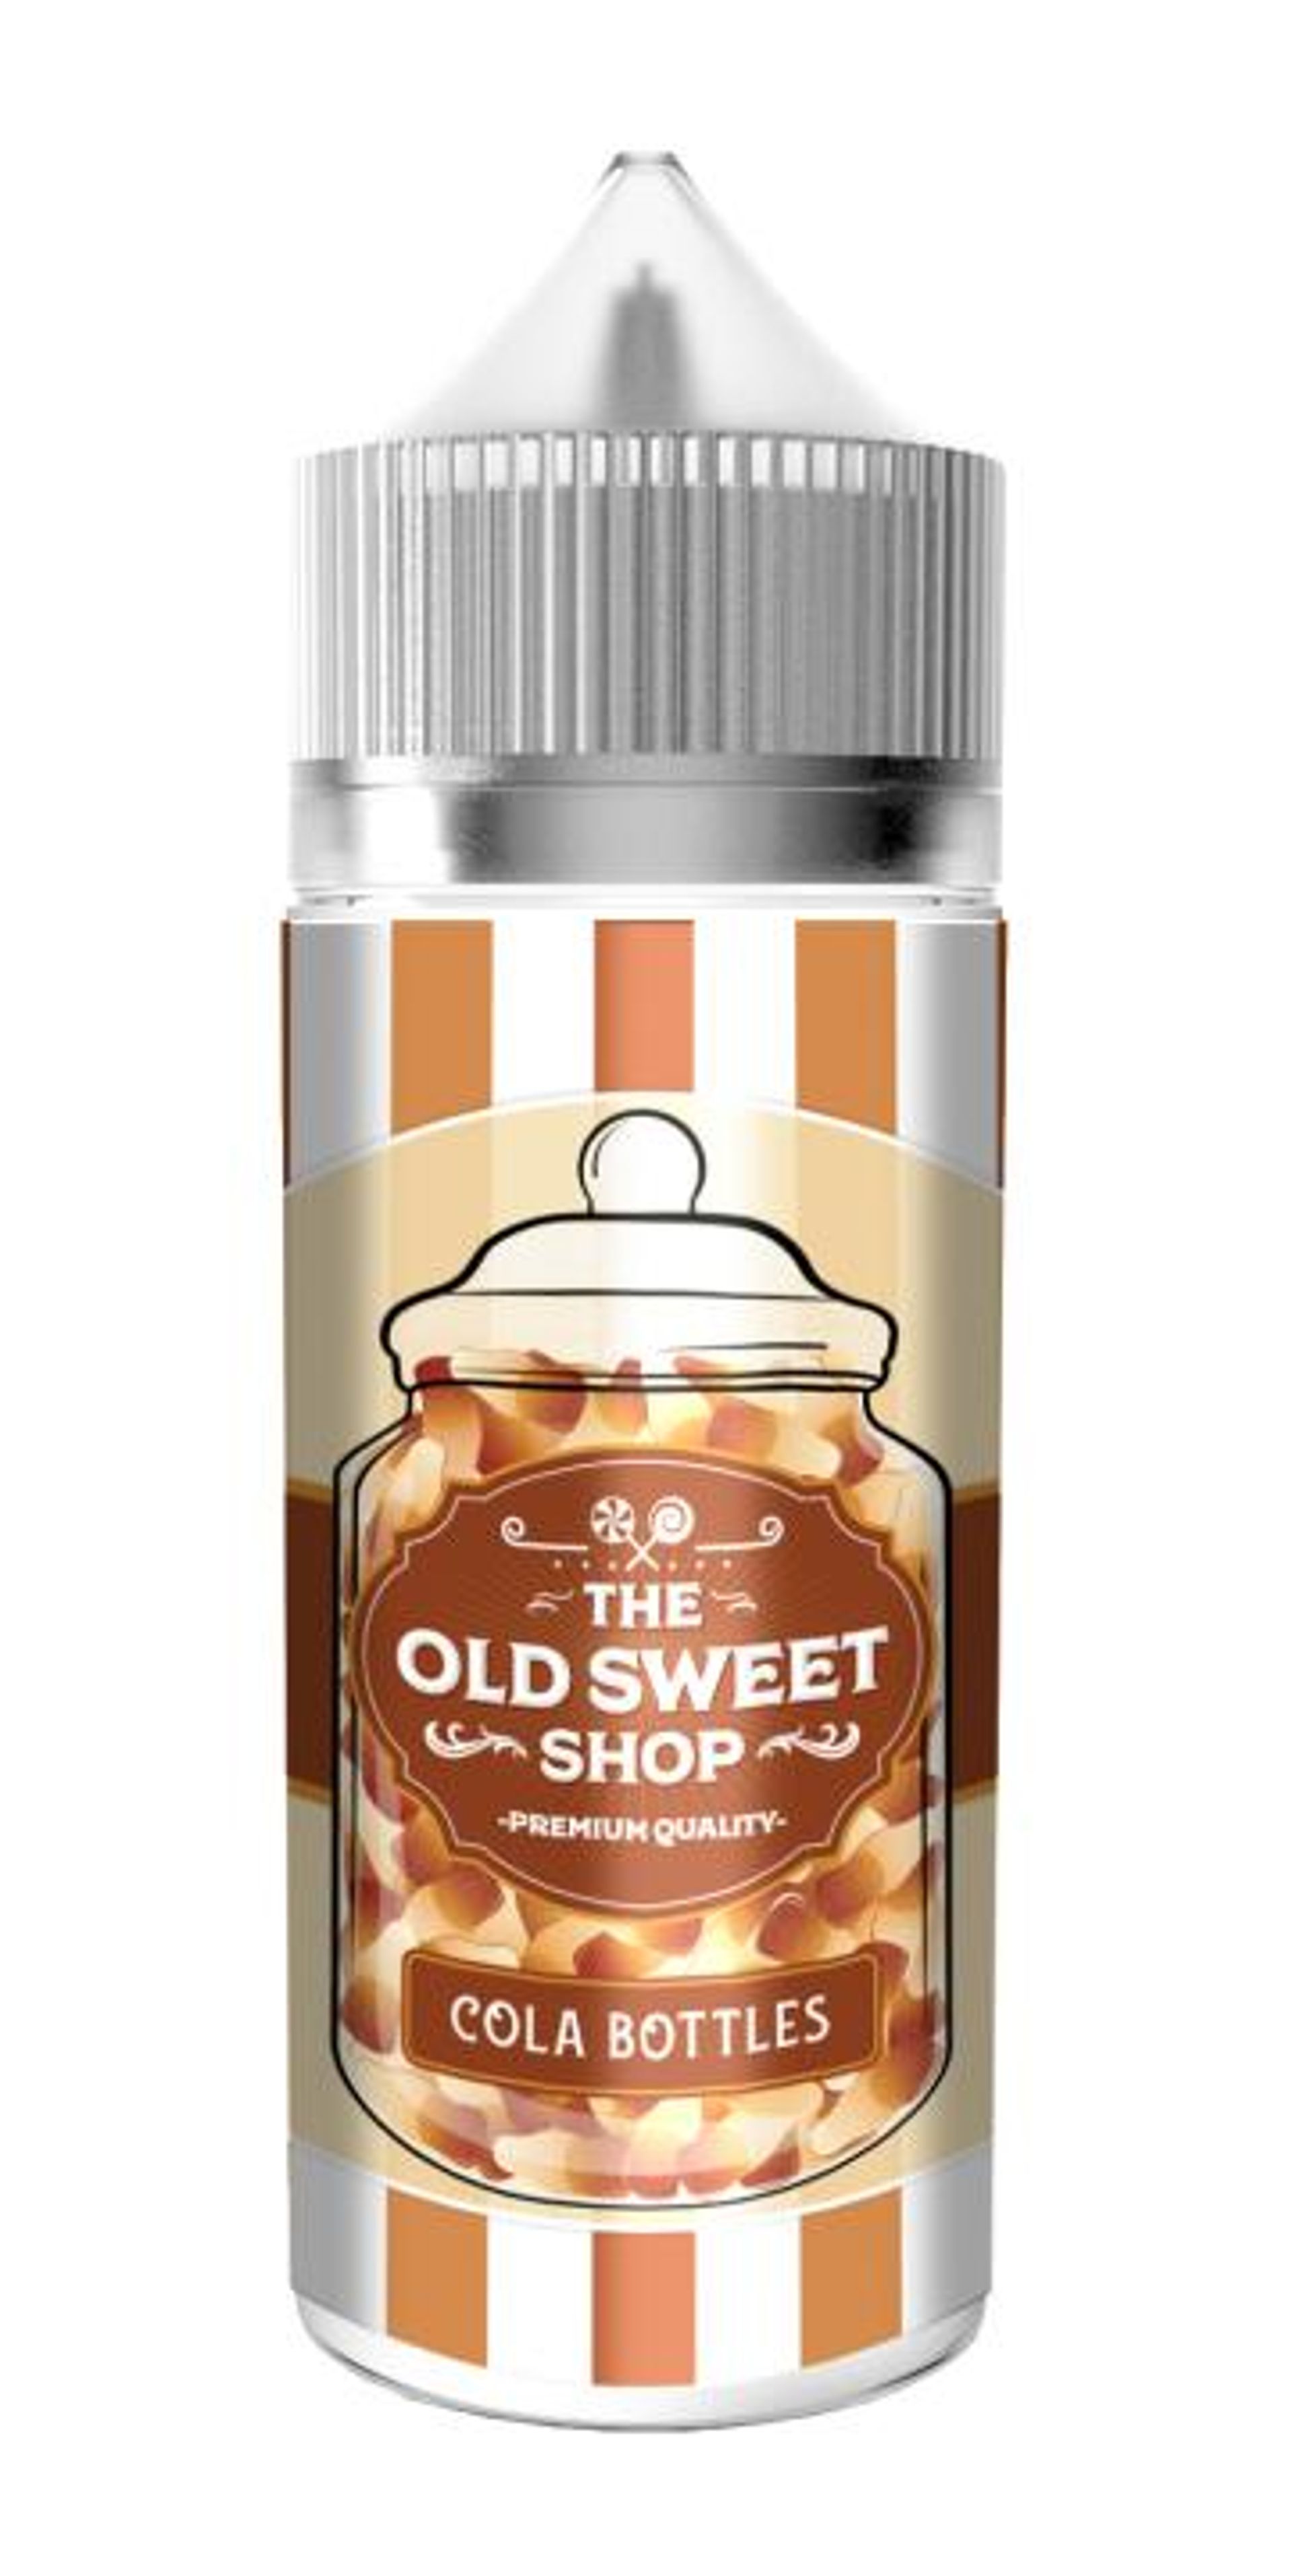 Image of Cola Bottles by The Old Sweet Shop